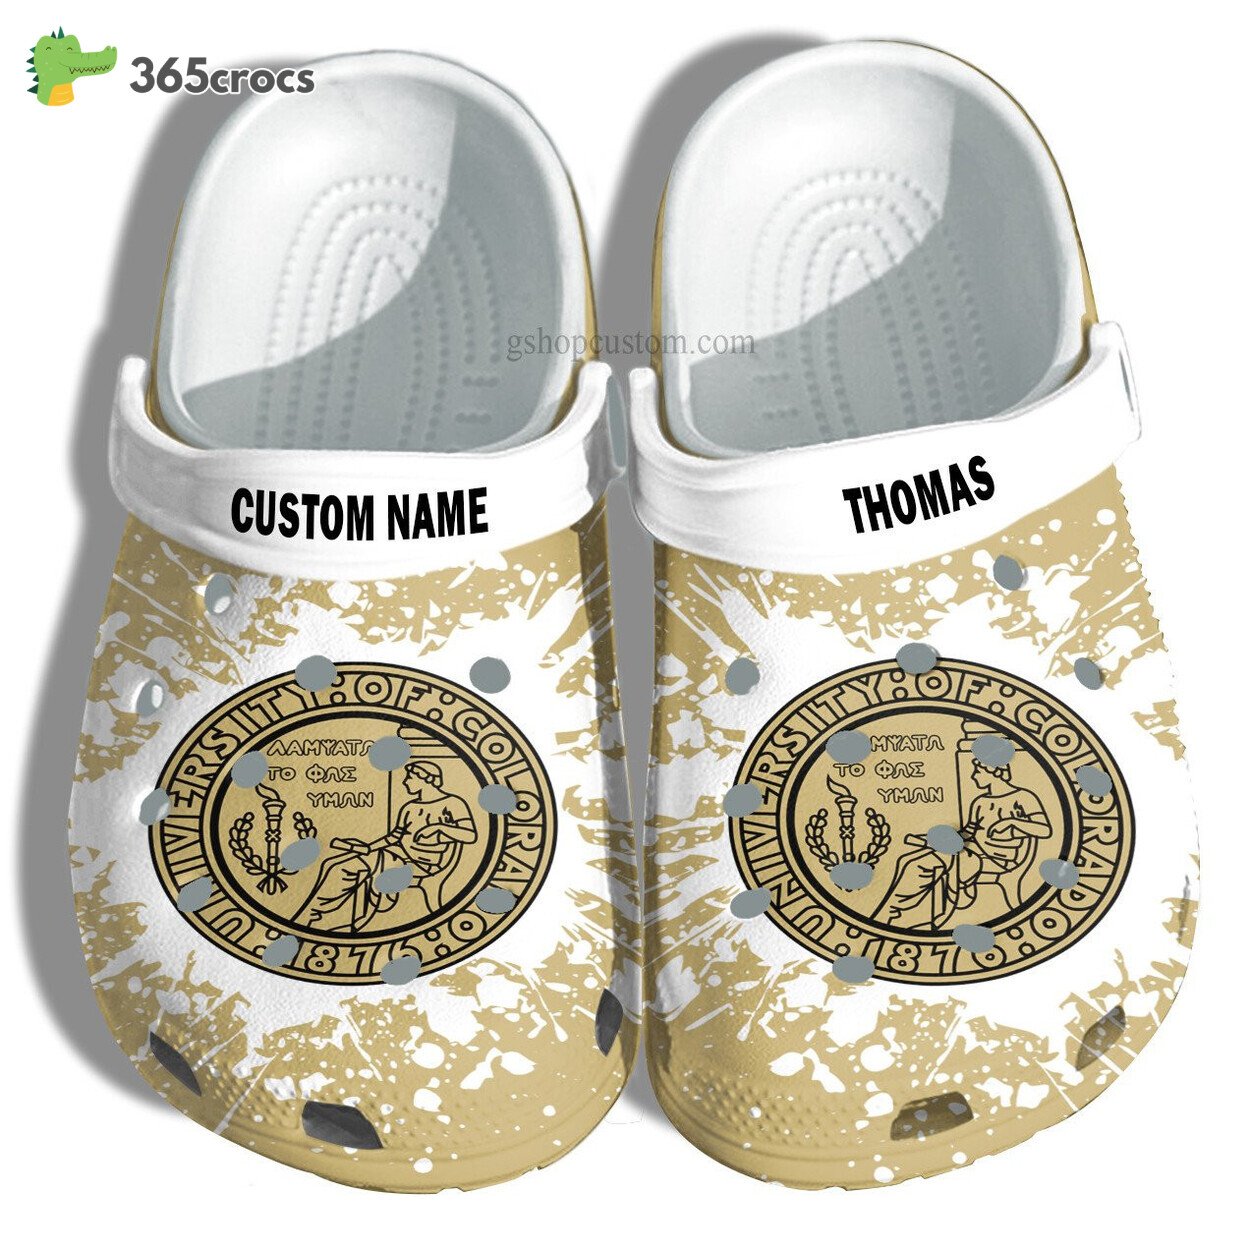 University Of Colorado Boulder Graduation Gifts Croc Shoes Customize Admission Gift Shoes